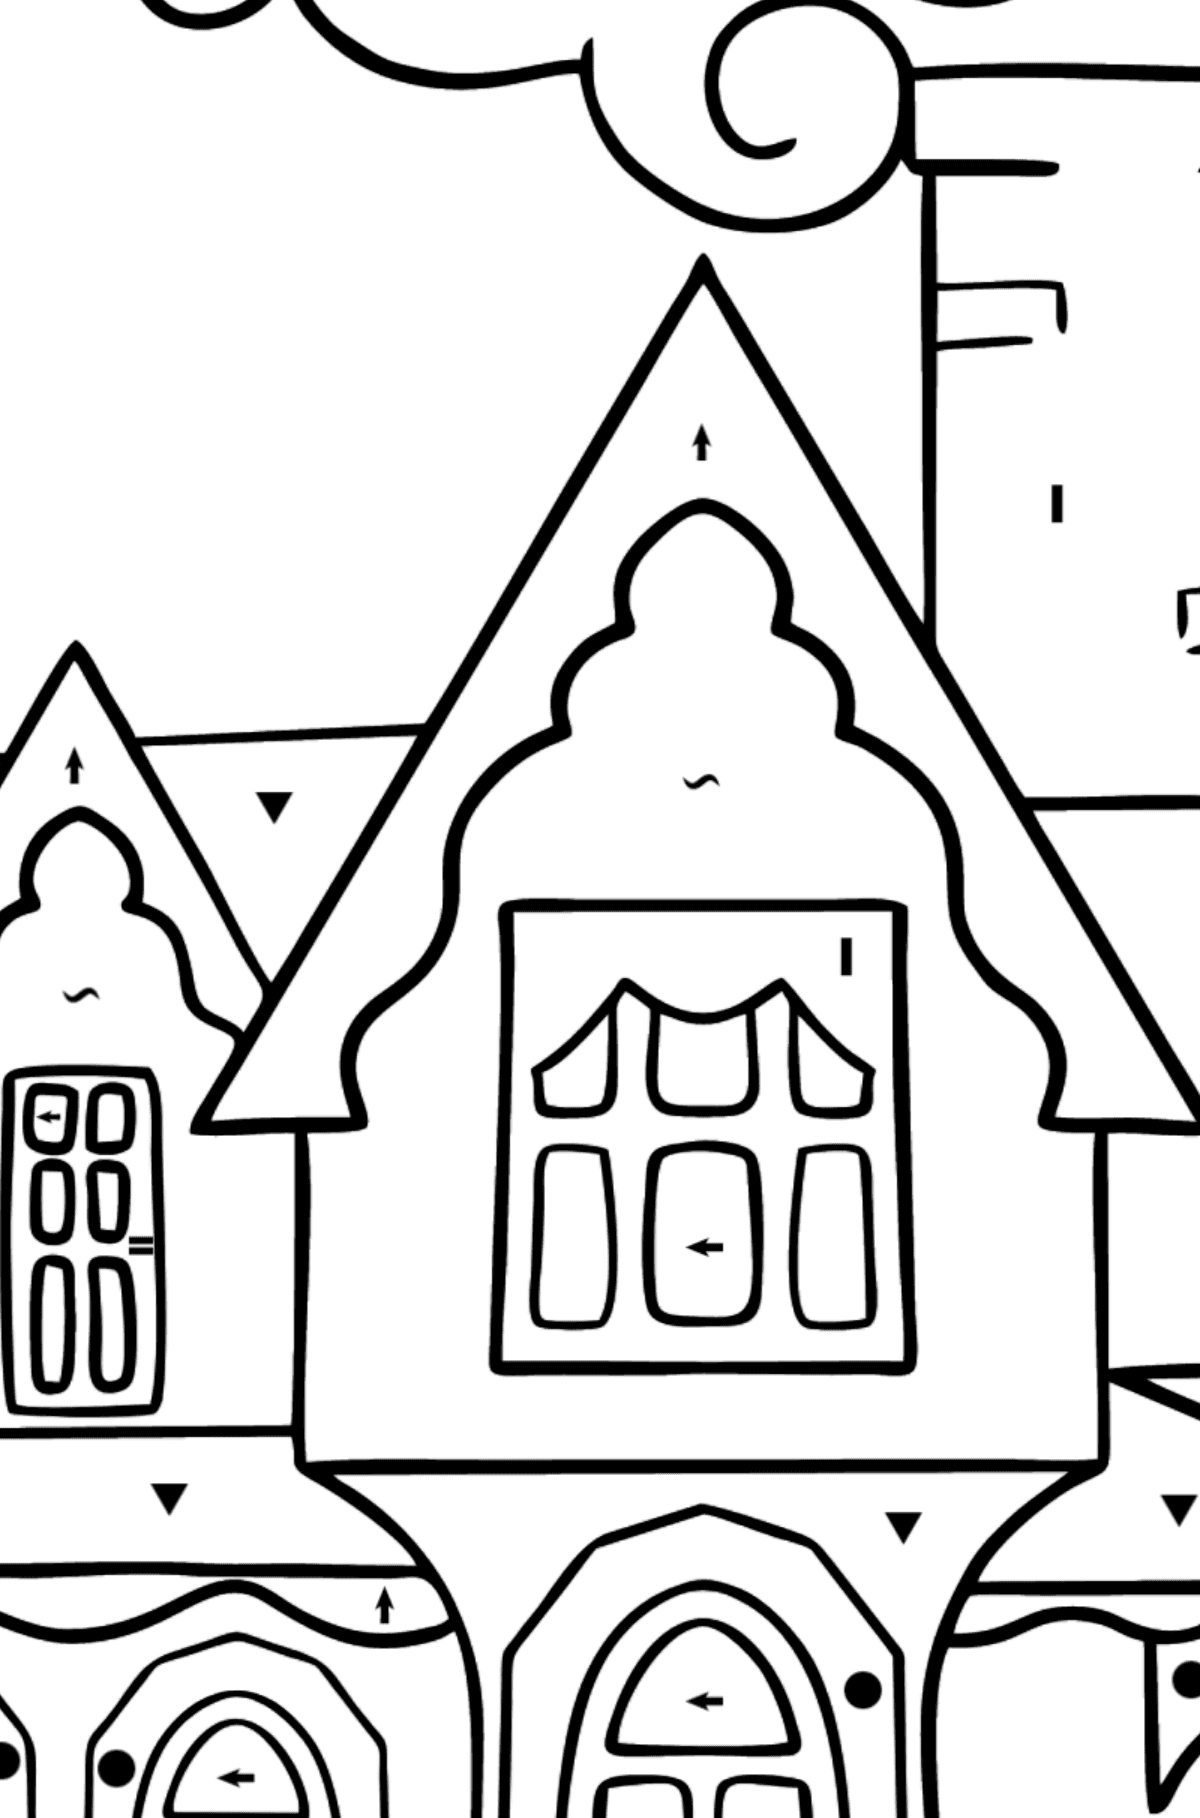 Coloring Page - A Miraculous House - Coloring by Symbols for Kids